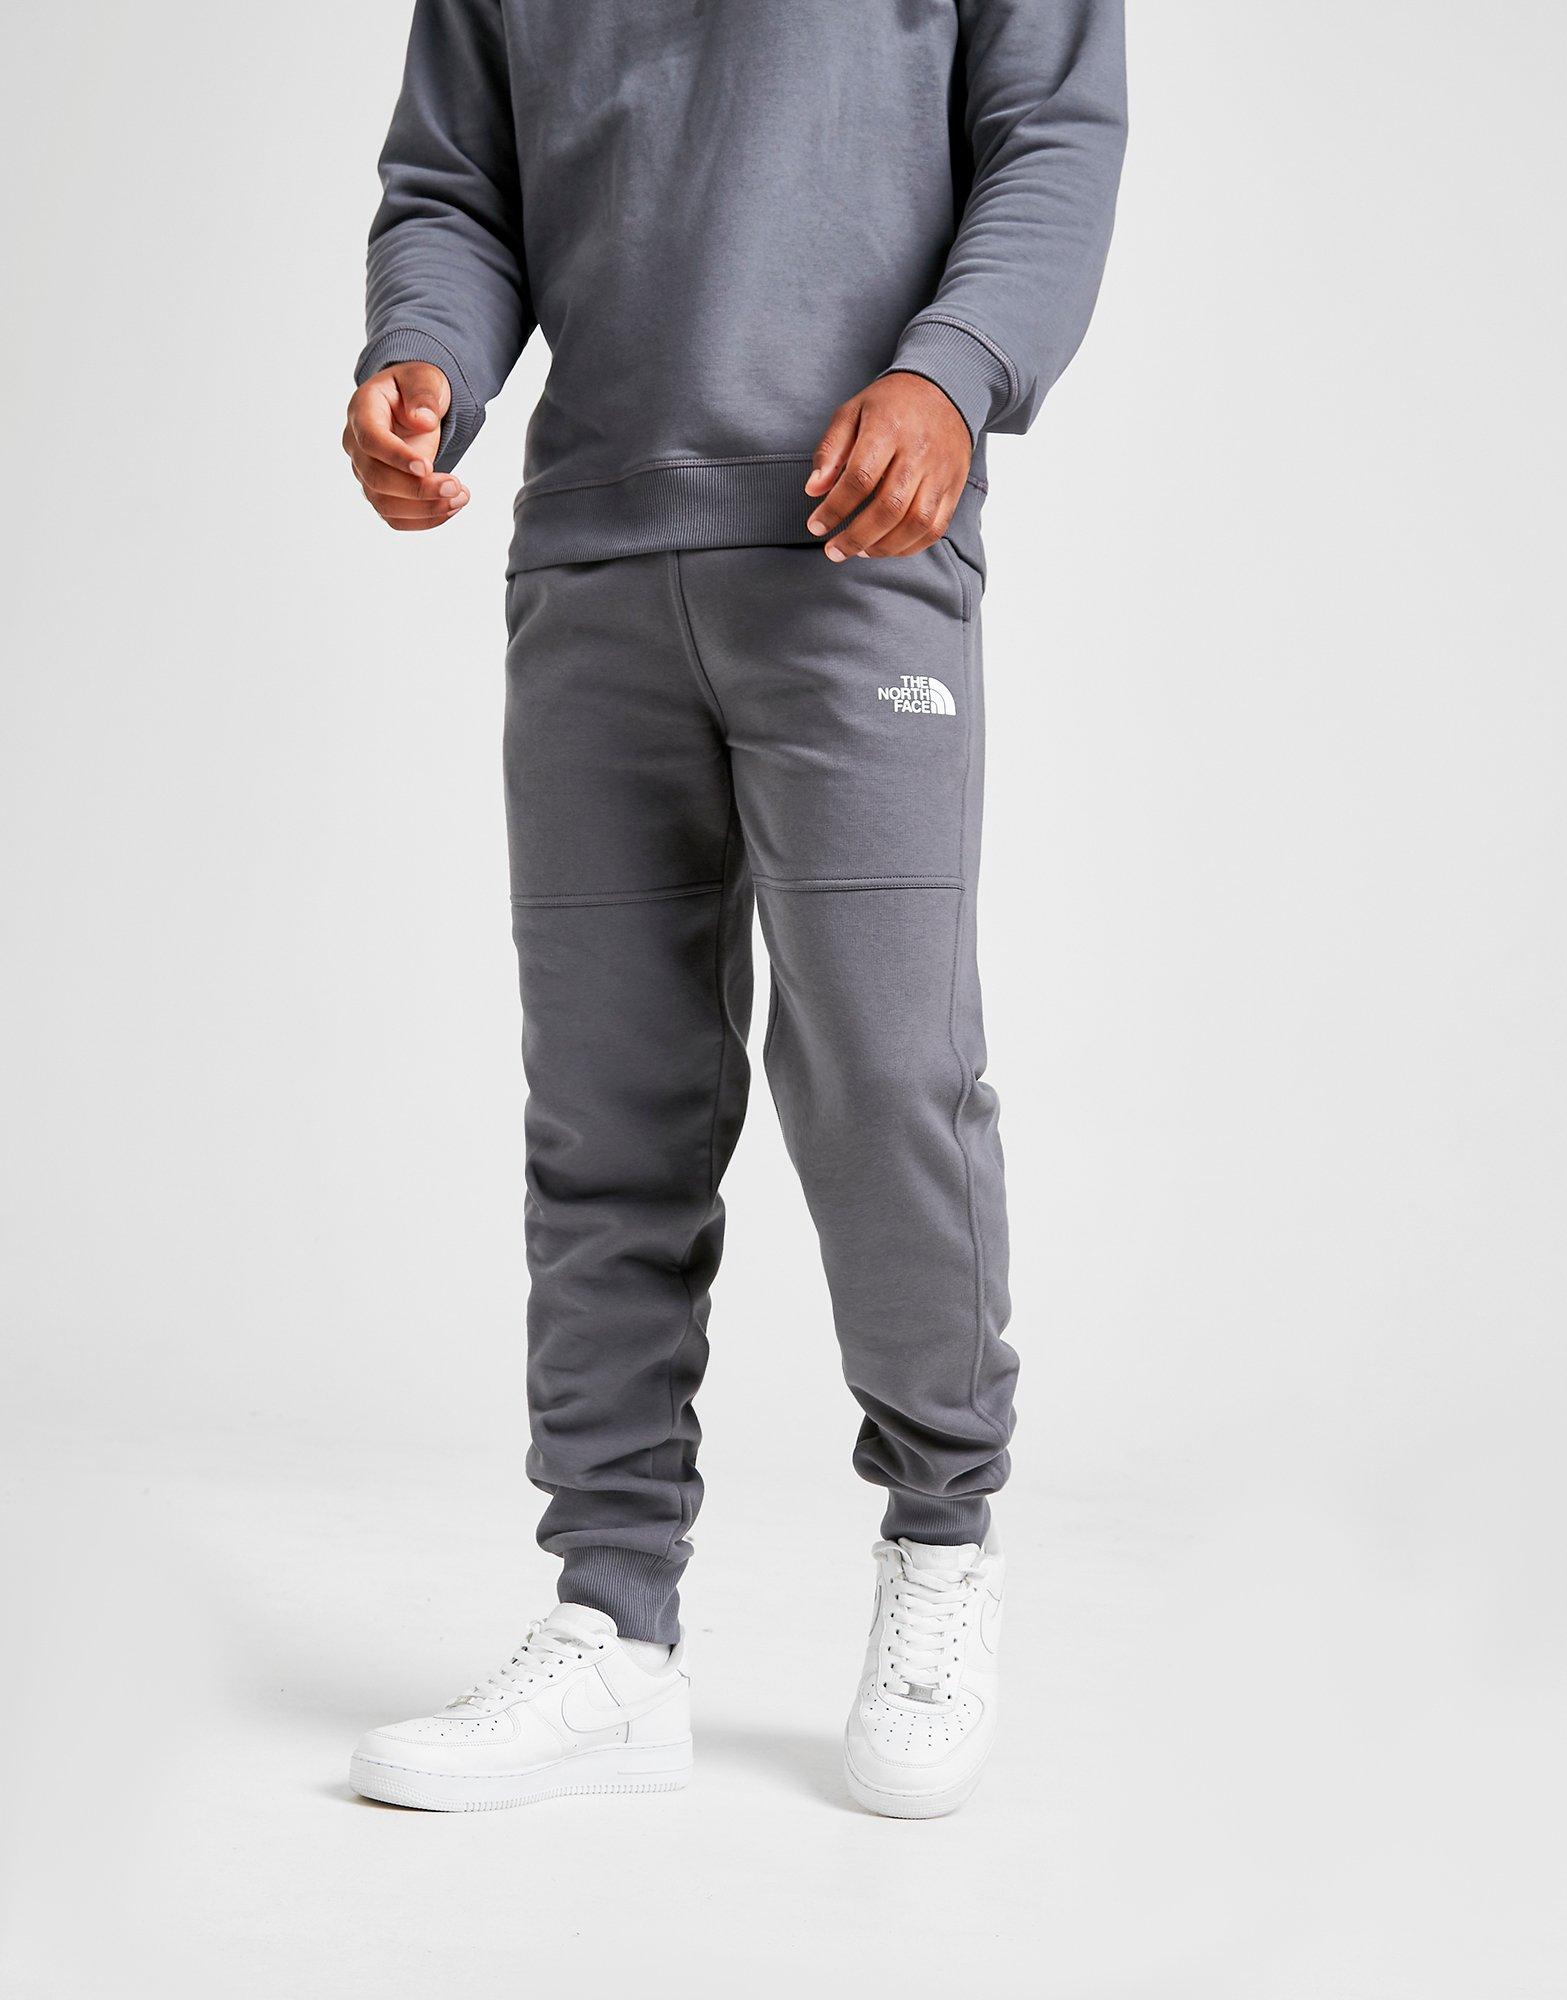 jd sports north face joggers